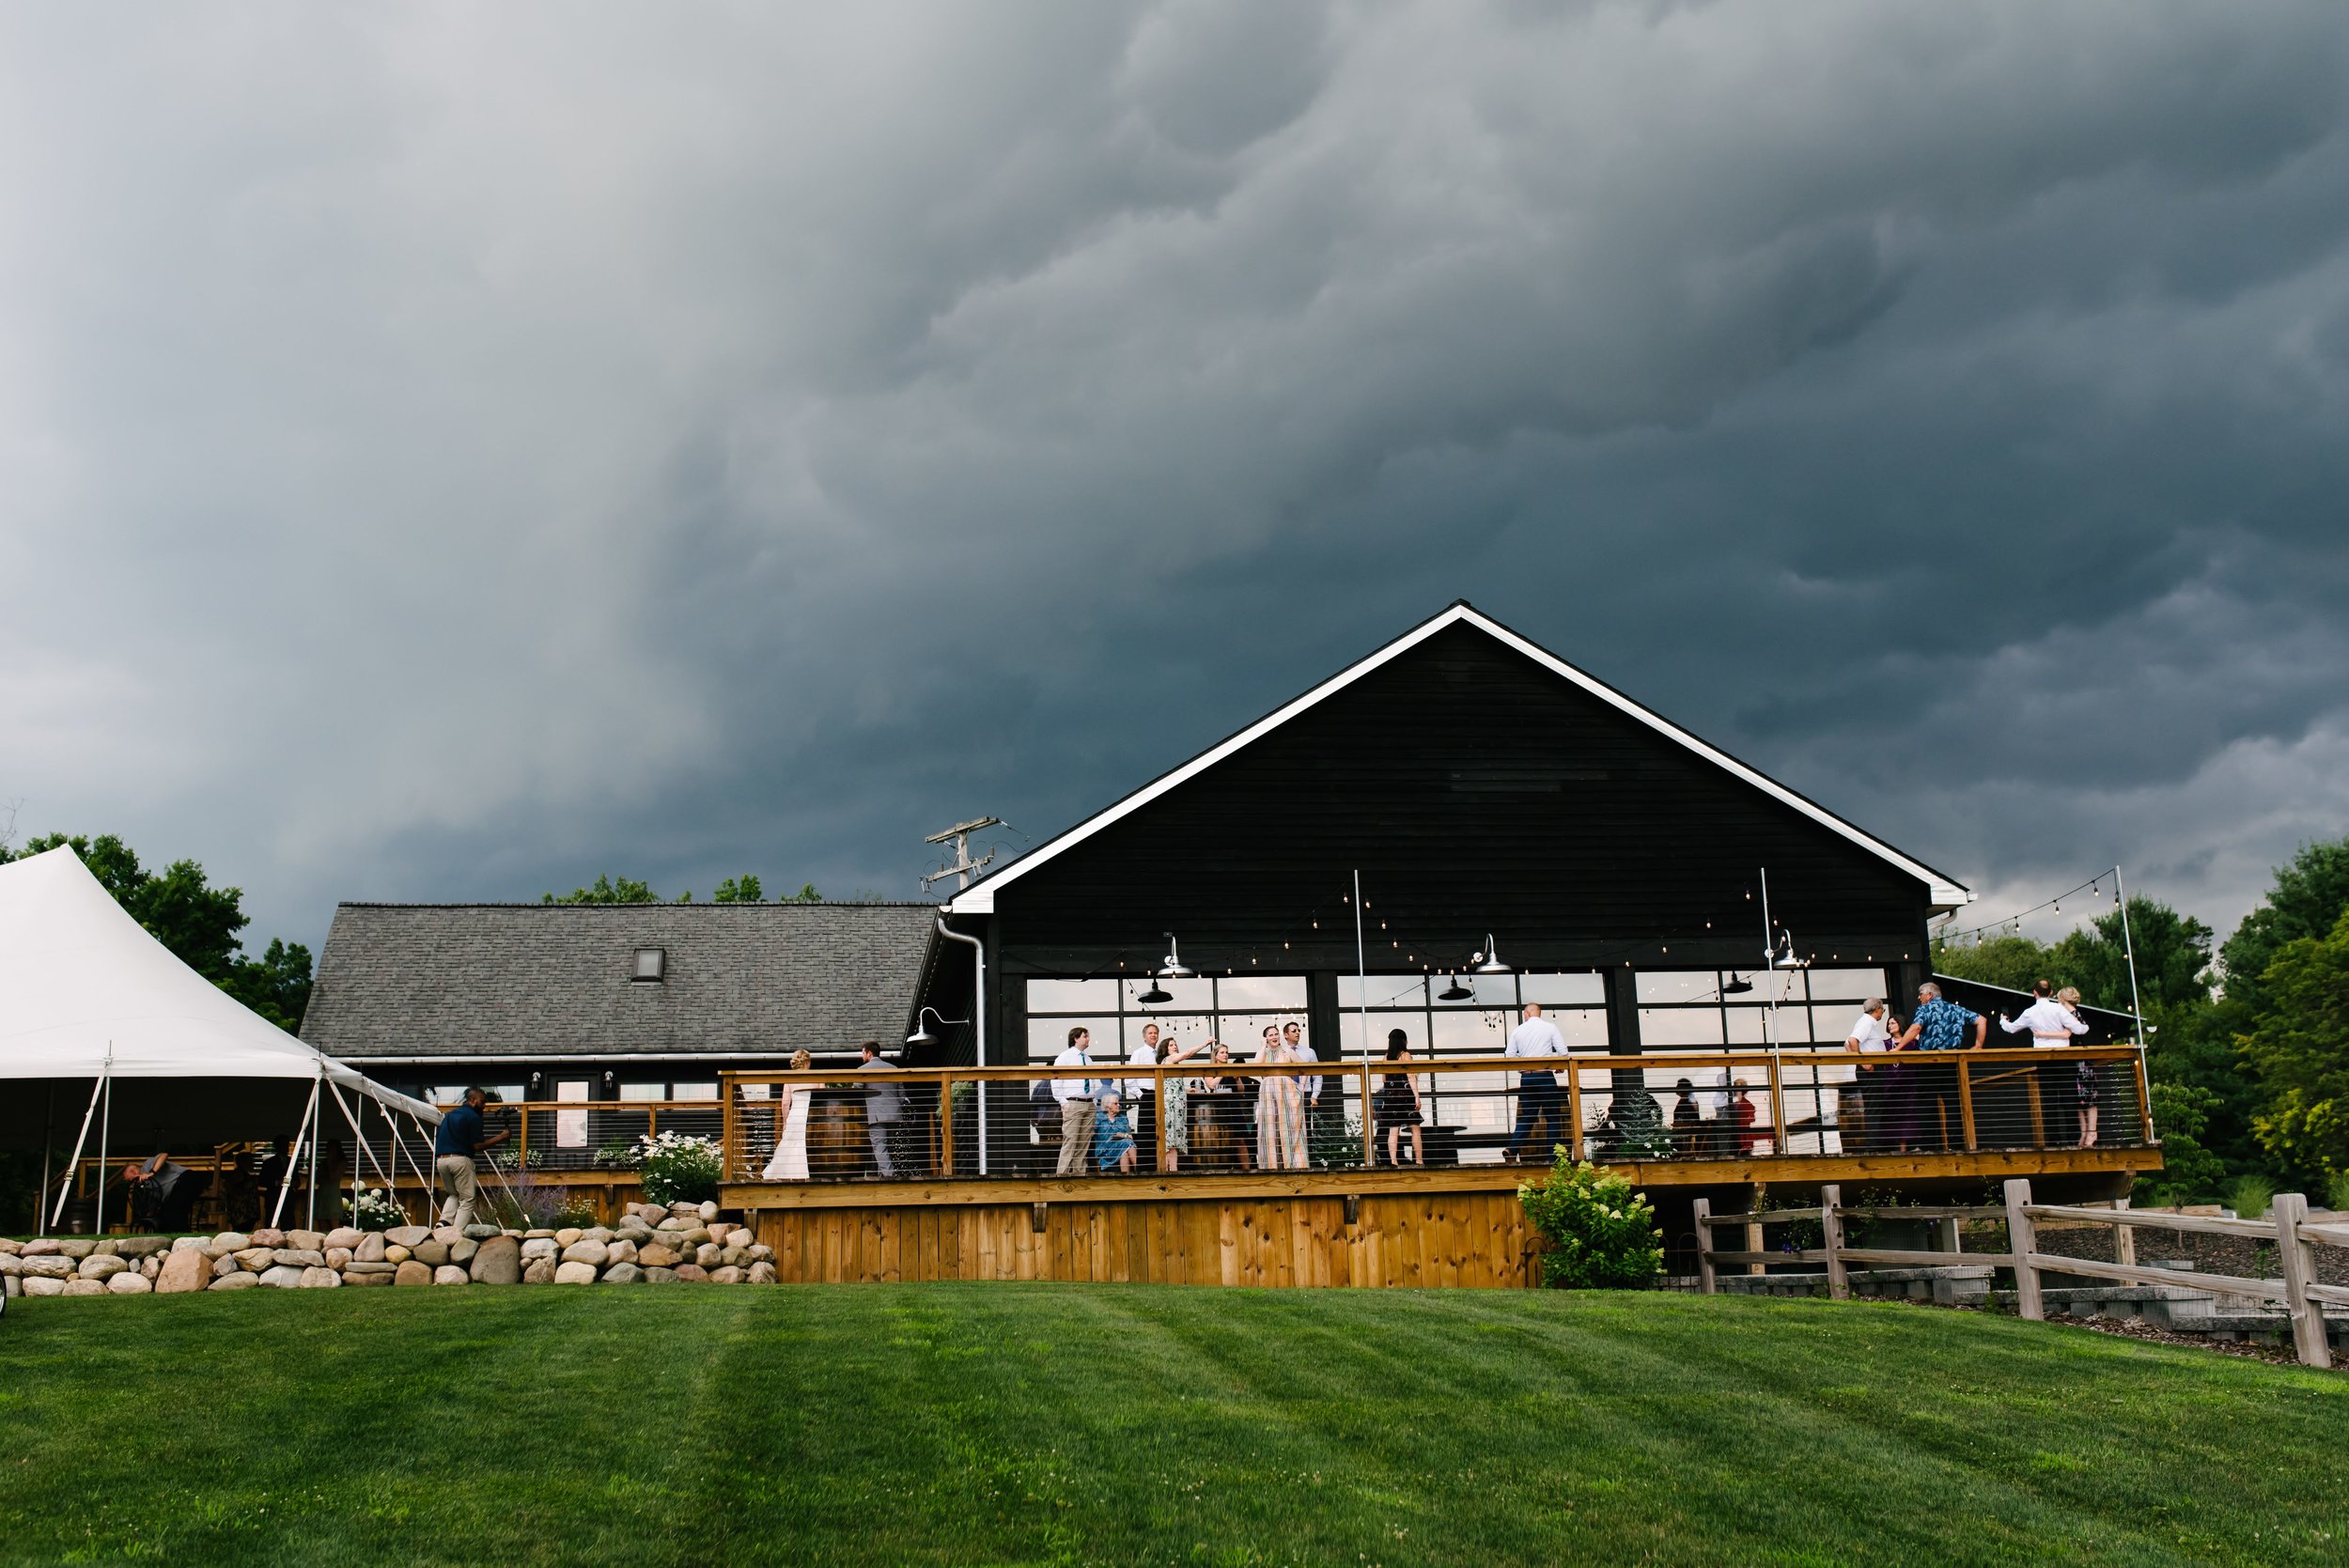 Storm clouds rolling in over the beautiful Black Barn Vineyard and Winery. No rain could spoil this day!